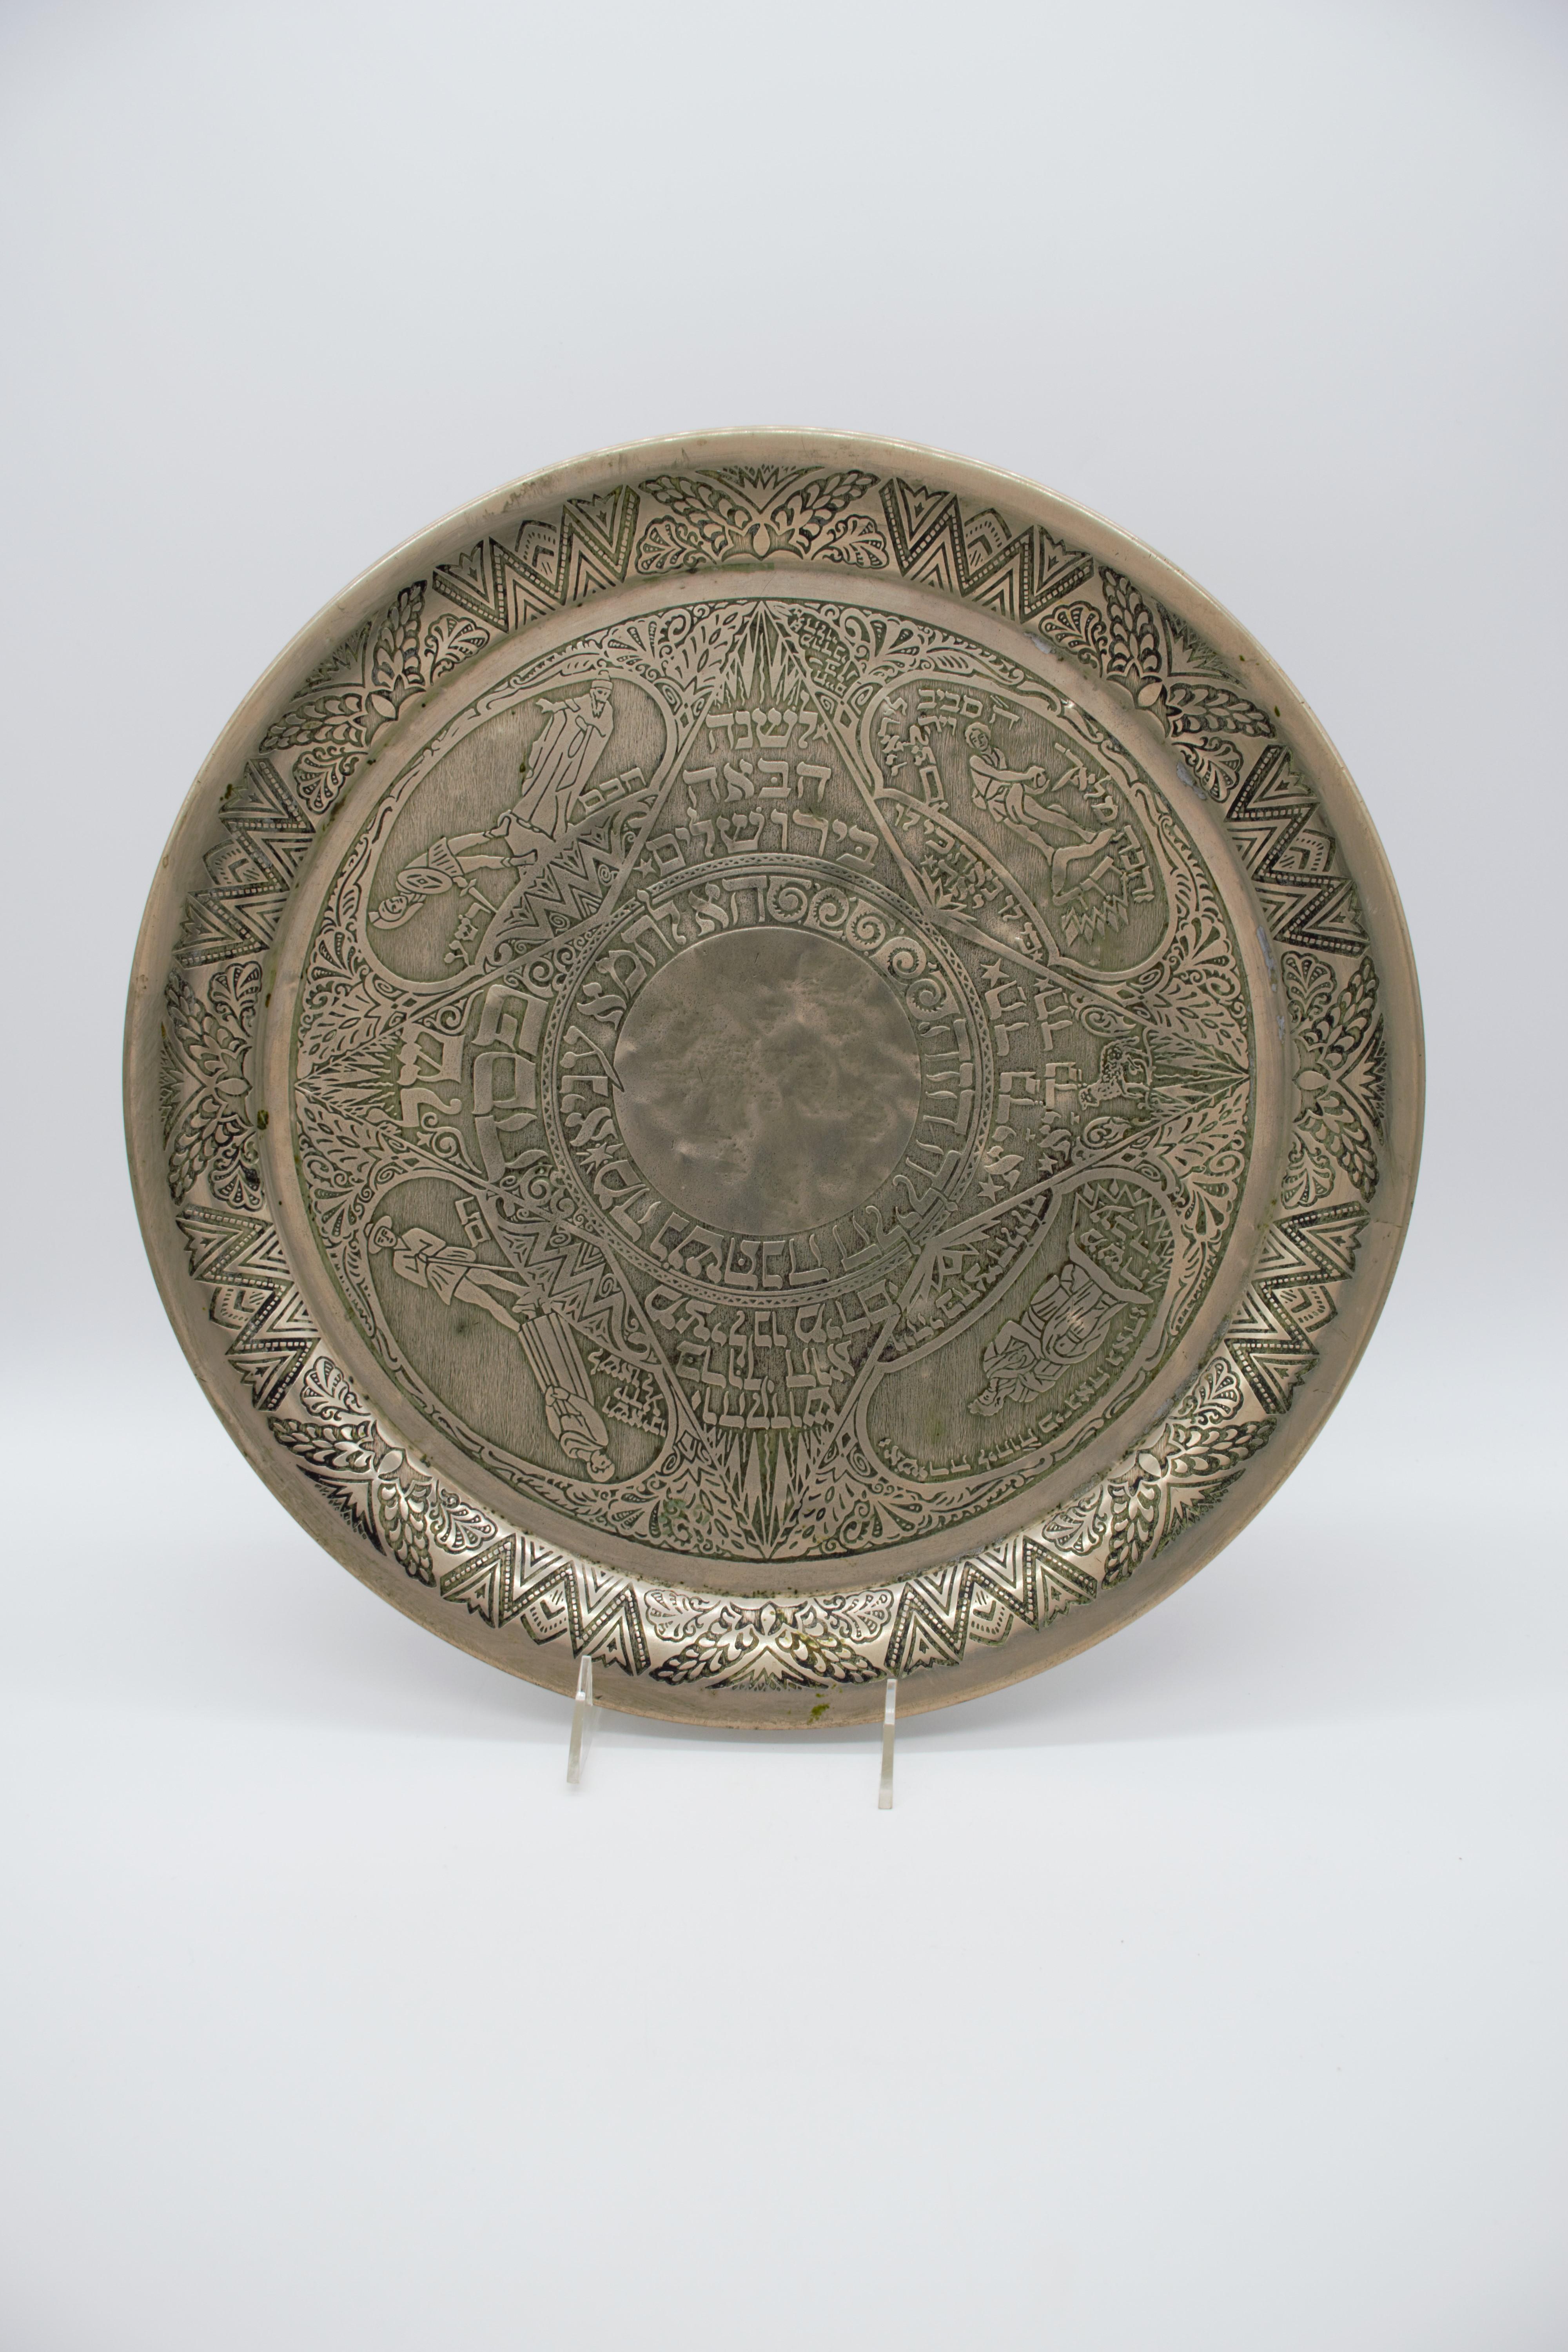 Decorative Passover plate by Heinrich Schwed. Munich, 1924. 
ALPACA, etched. 
This Large plate, featuring a round medallion in the center, with a Matzah which in this plate is hand chased and hammered and not attached as in other examples,